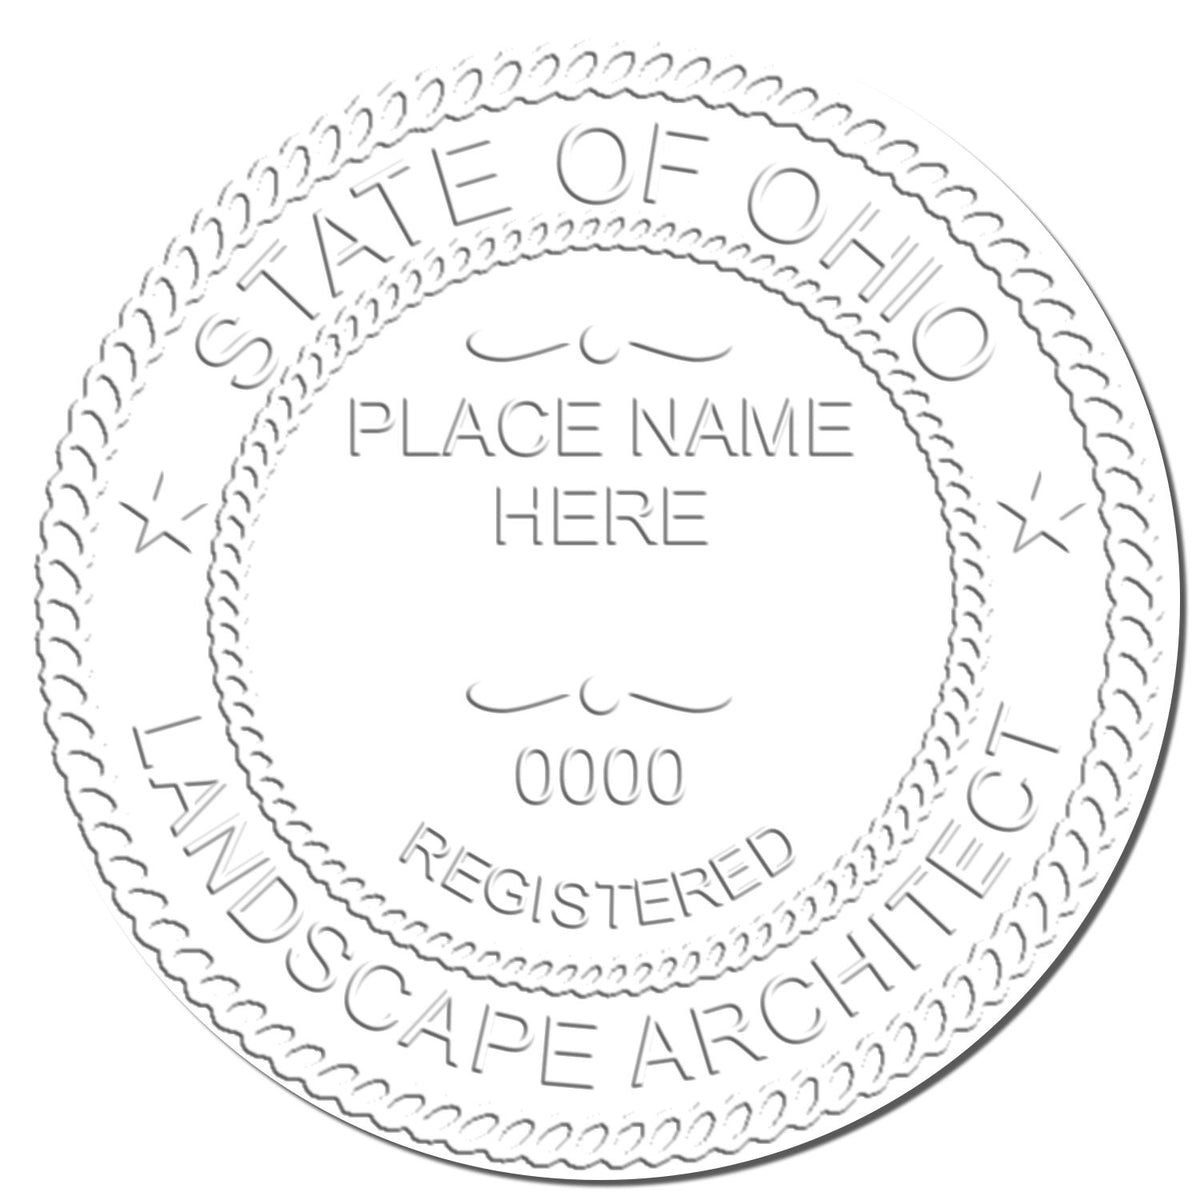 This paper is stamped with a sample imprint of the Gift Ohio Landscape Architect Seal, signifying its quality and reliability.